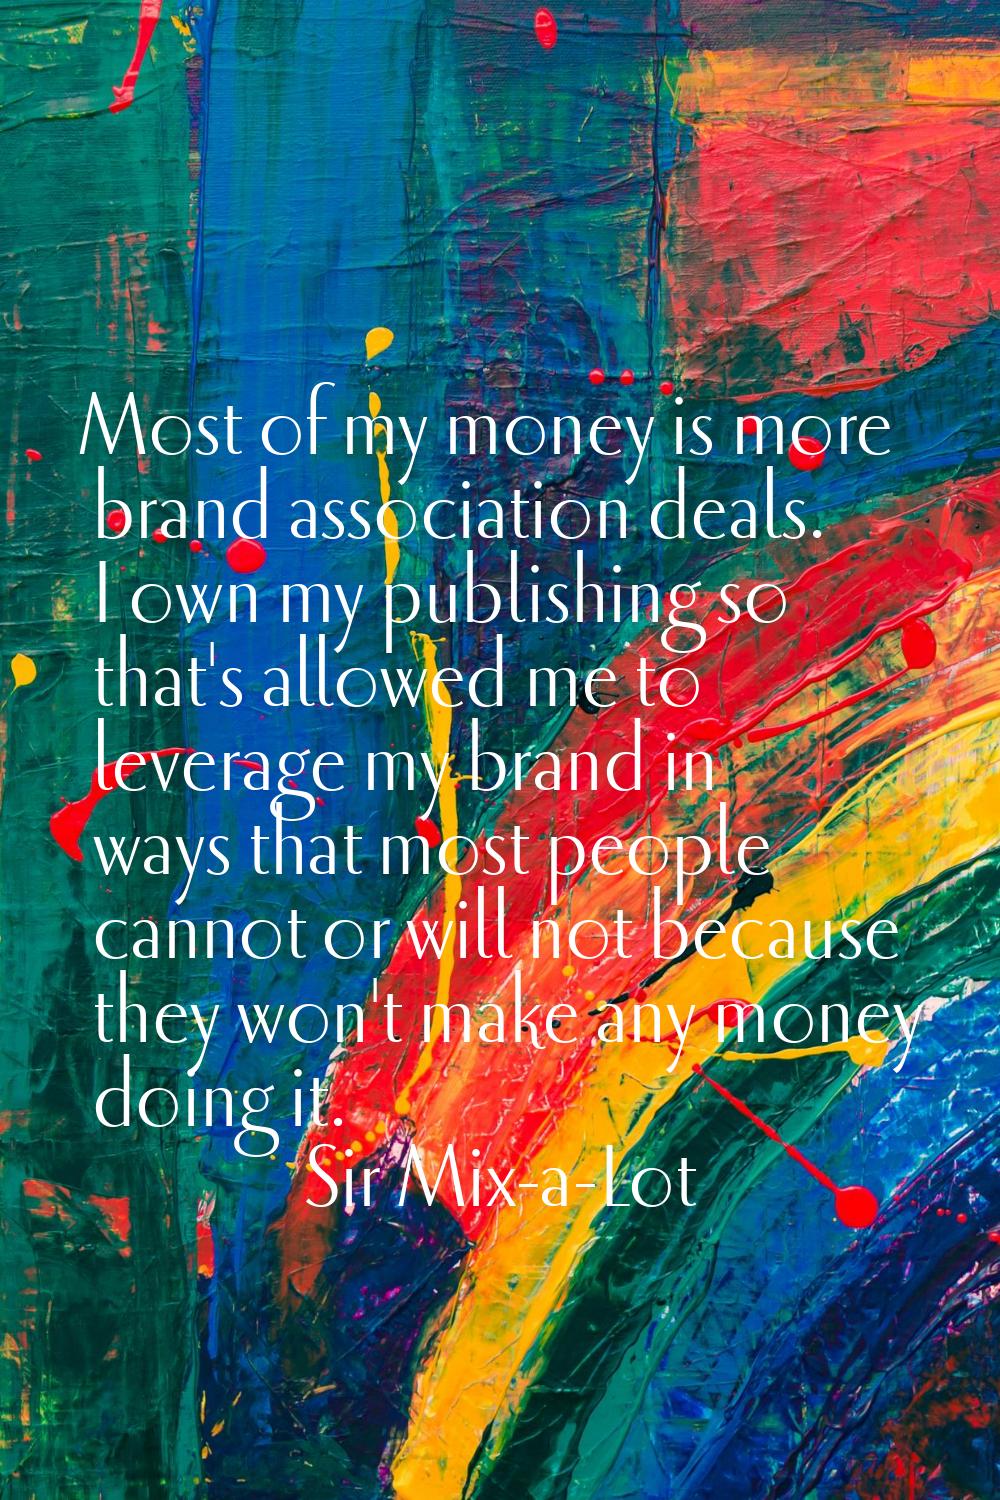 Most of my money is more brand association deals. I own my publishing so that's allowed me to lever